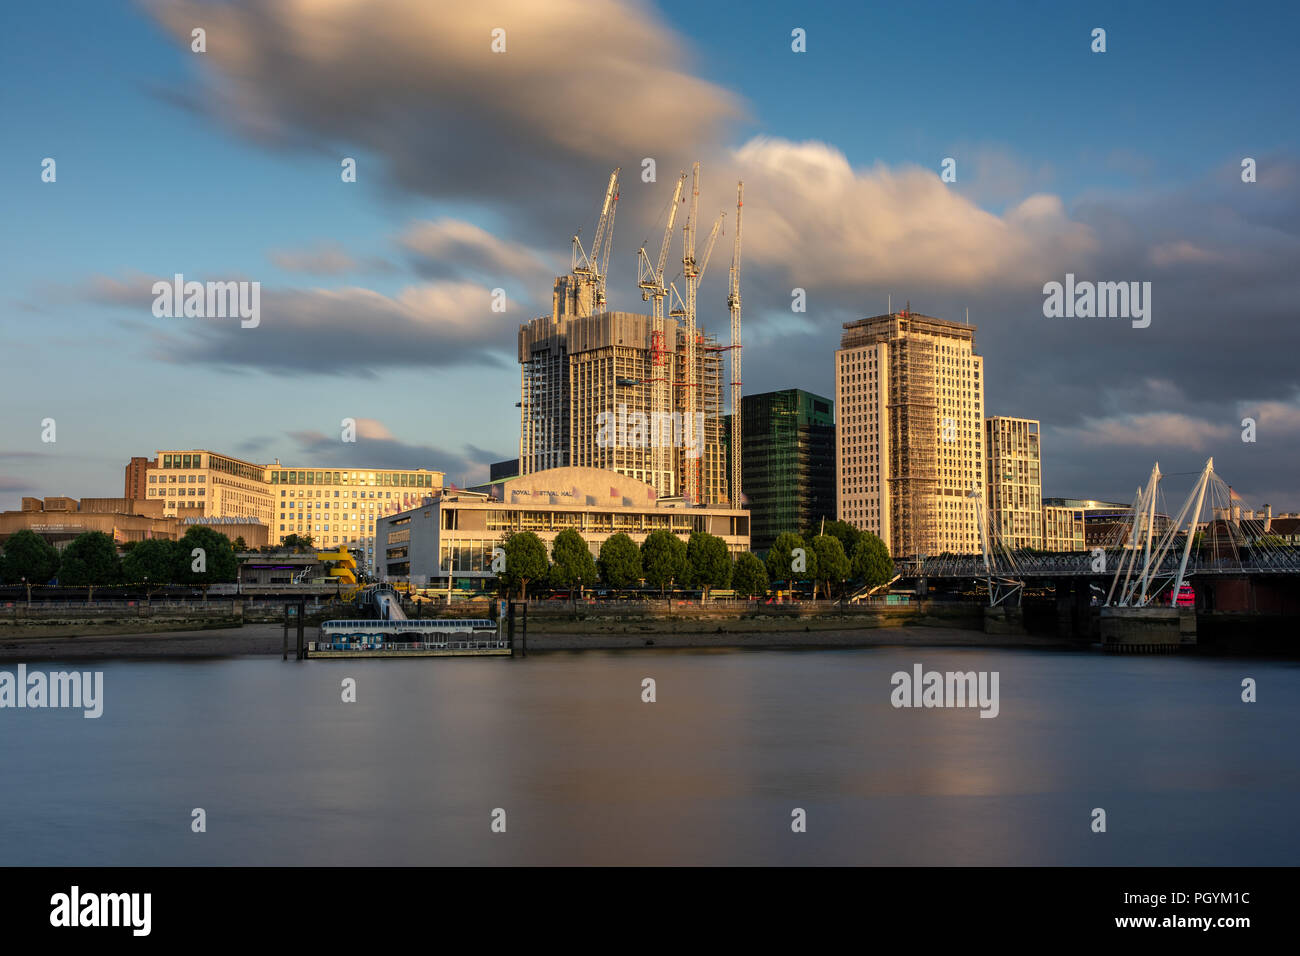 London, England, UK - June 12, 2018: New skyscrapers are under construction at the Shell Centre behind the Royal Festival Hall on the South Bank of th Stock Photo